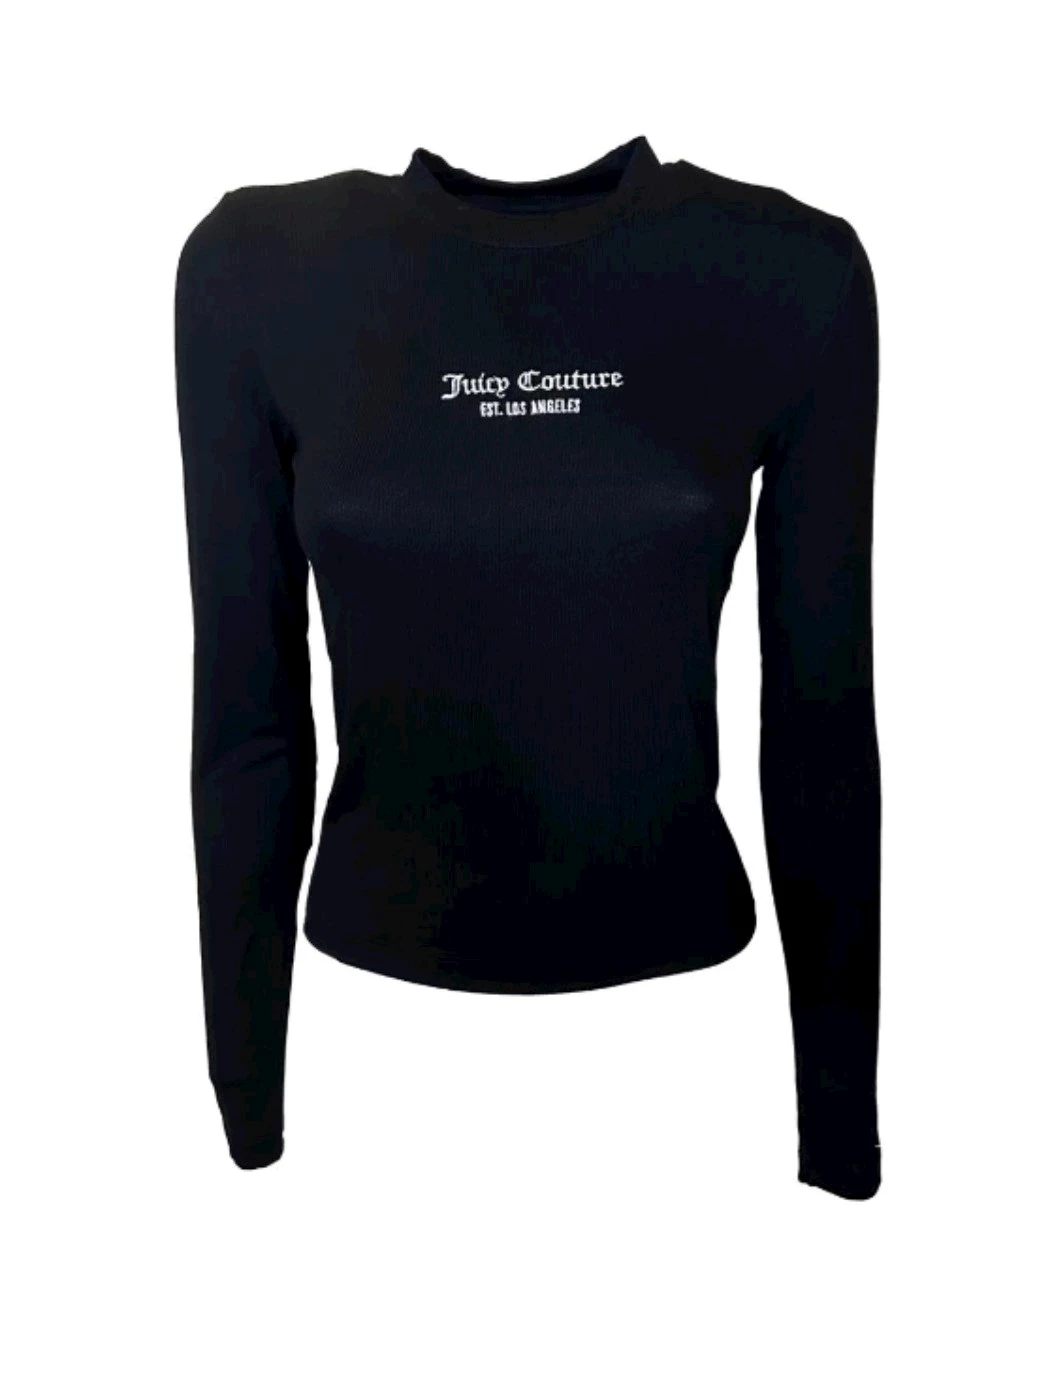 Juicy Couture Long Sleeve T-Shirt